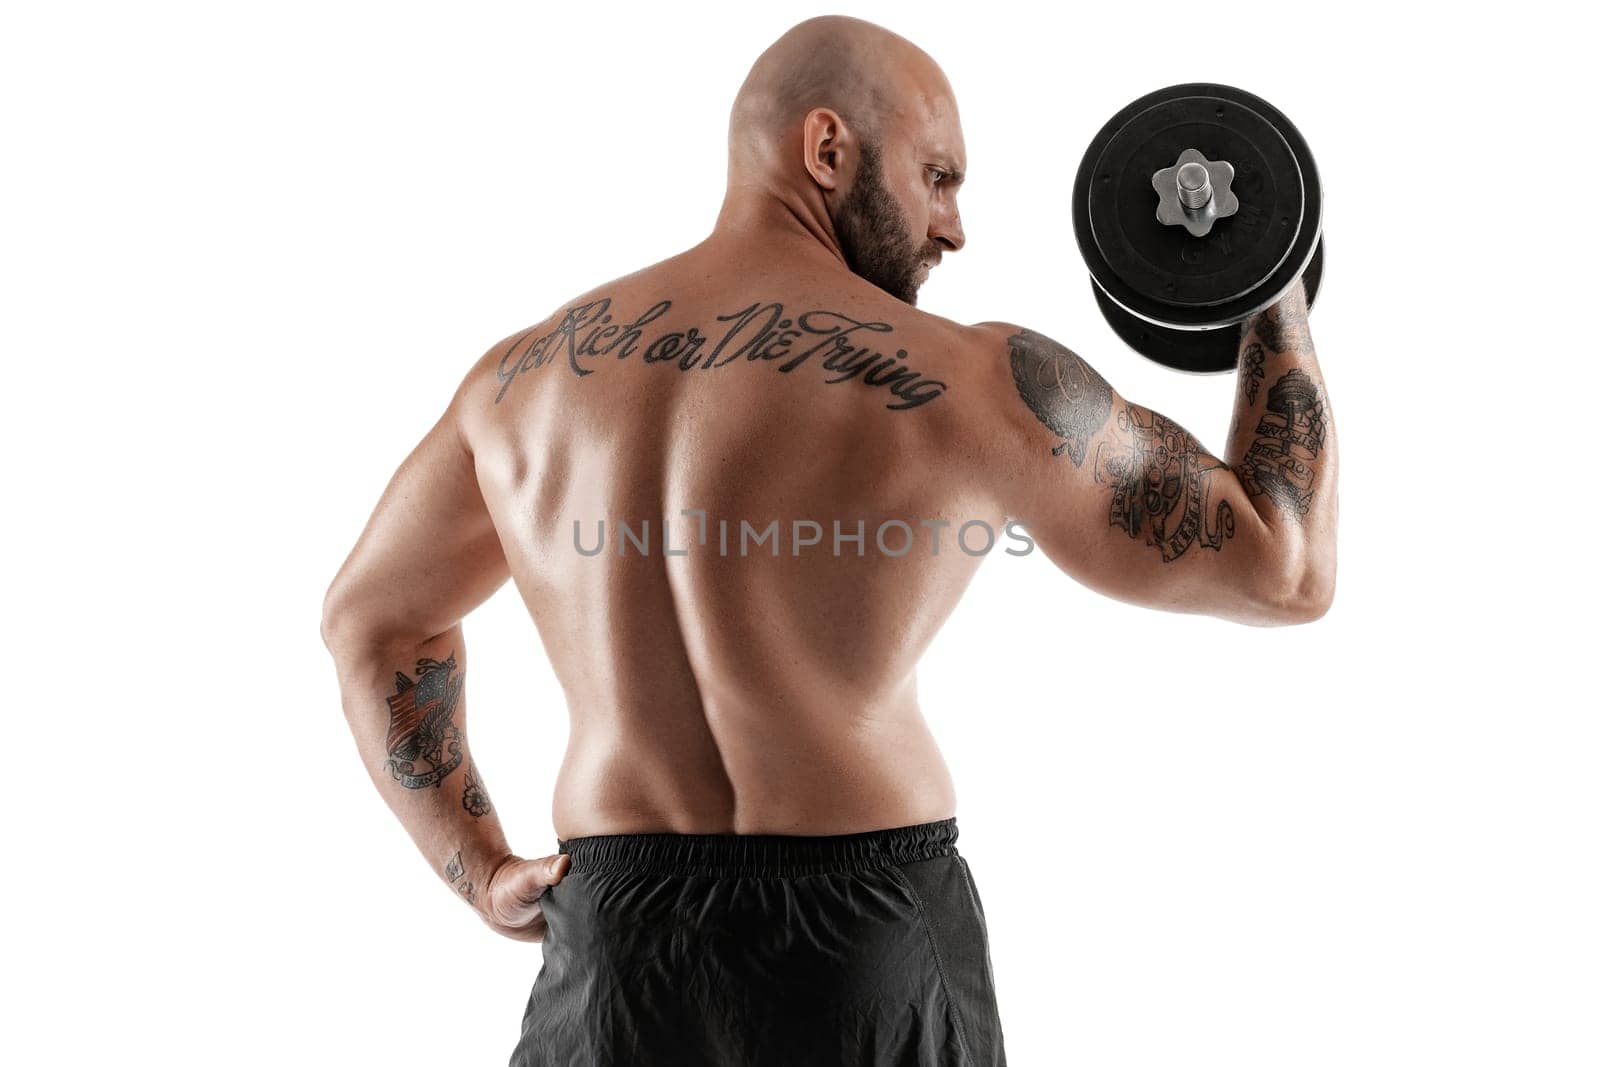 Masculine bald, bearded, tattooed man in black shorts is posing with a dumbbell in his hand, standing back, isolated on white background. Chic muscular body, fitness, gym, healthy lifestyle concept. Close-up portrait.